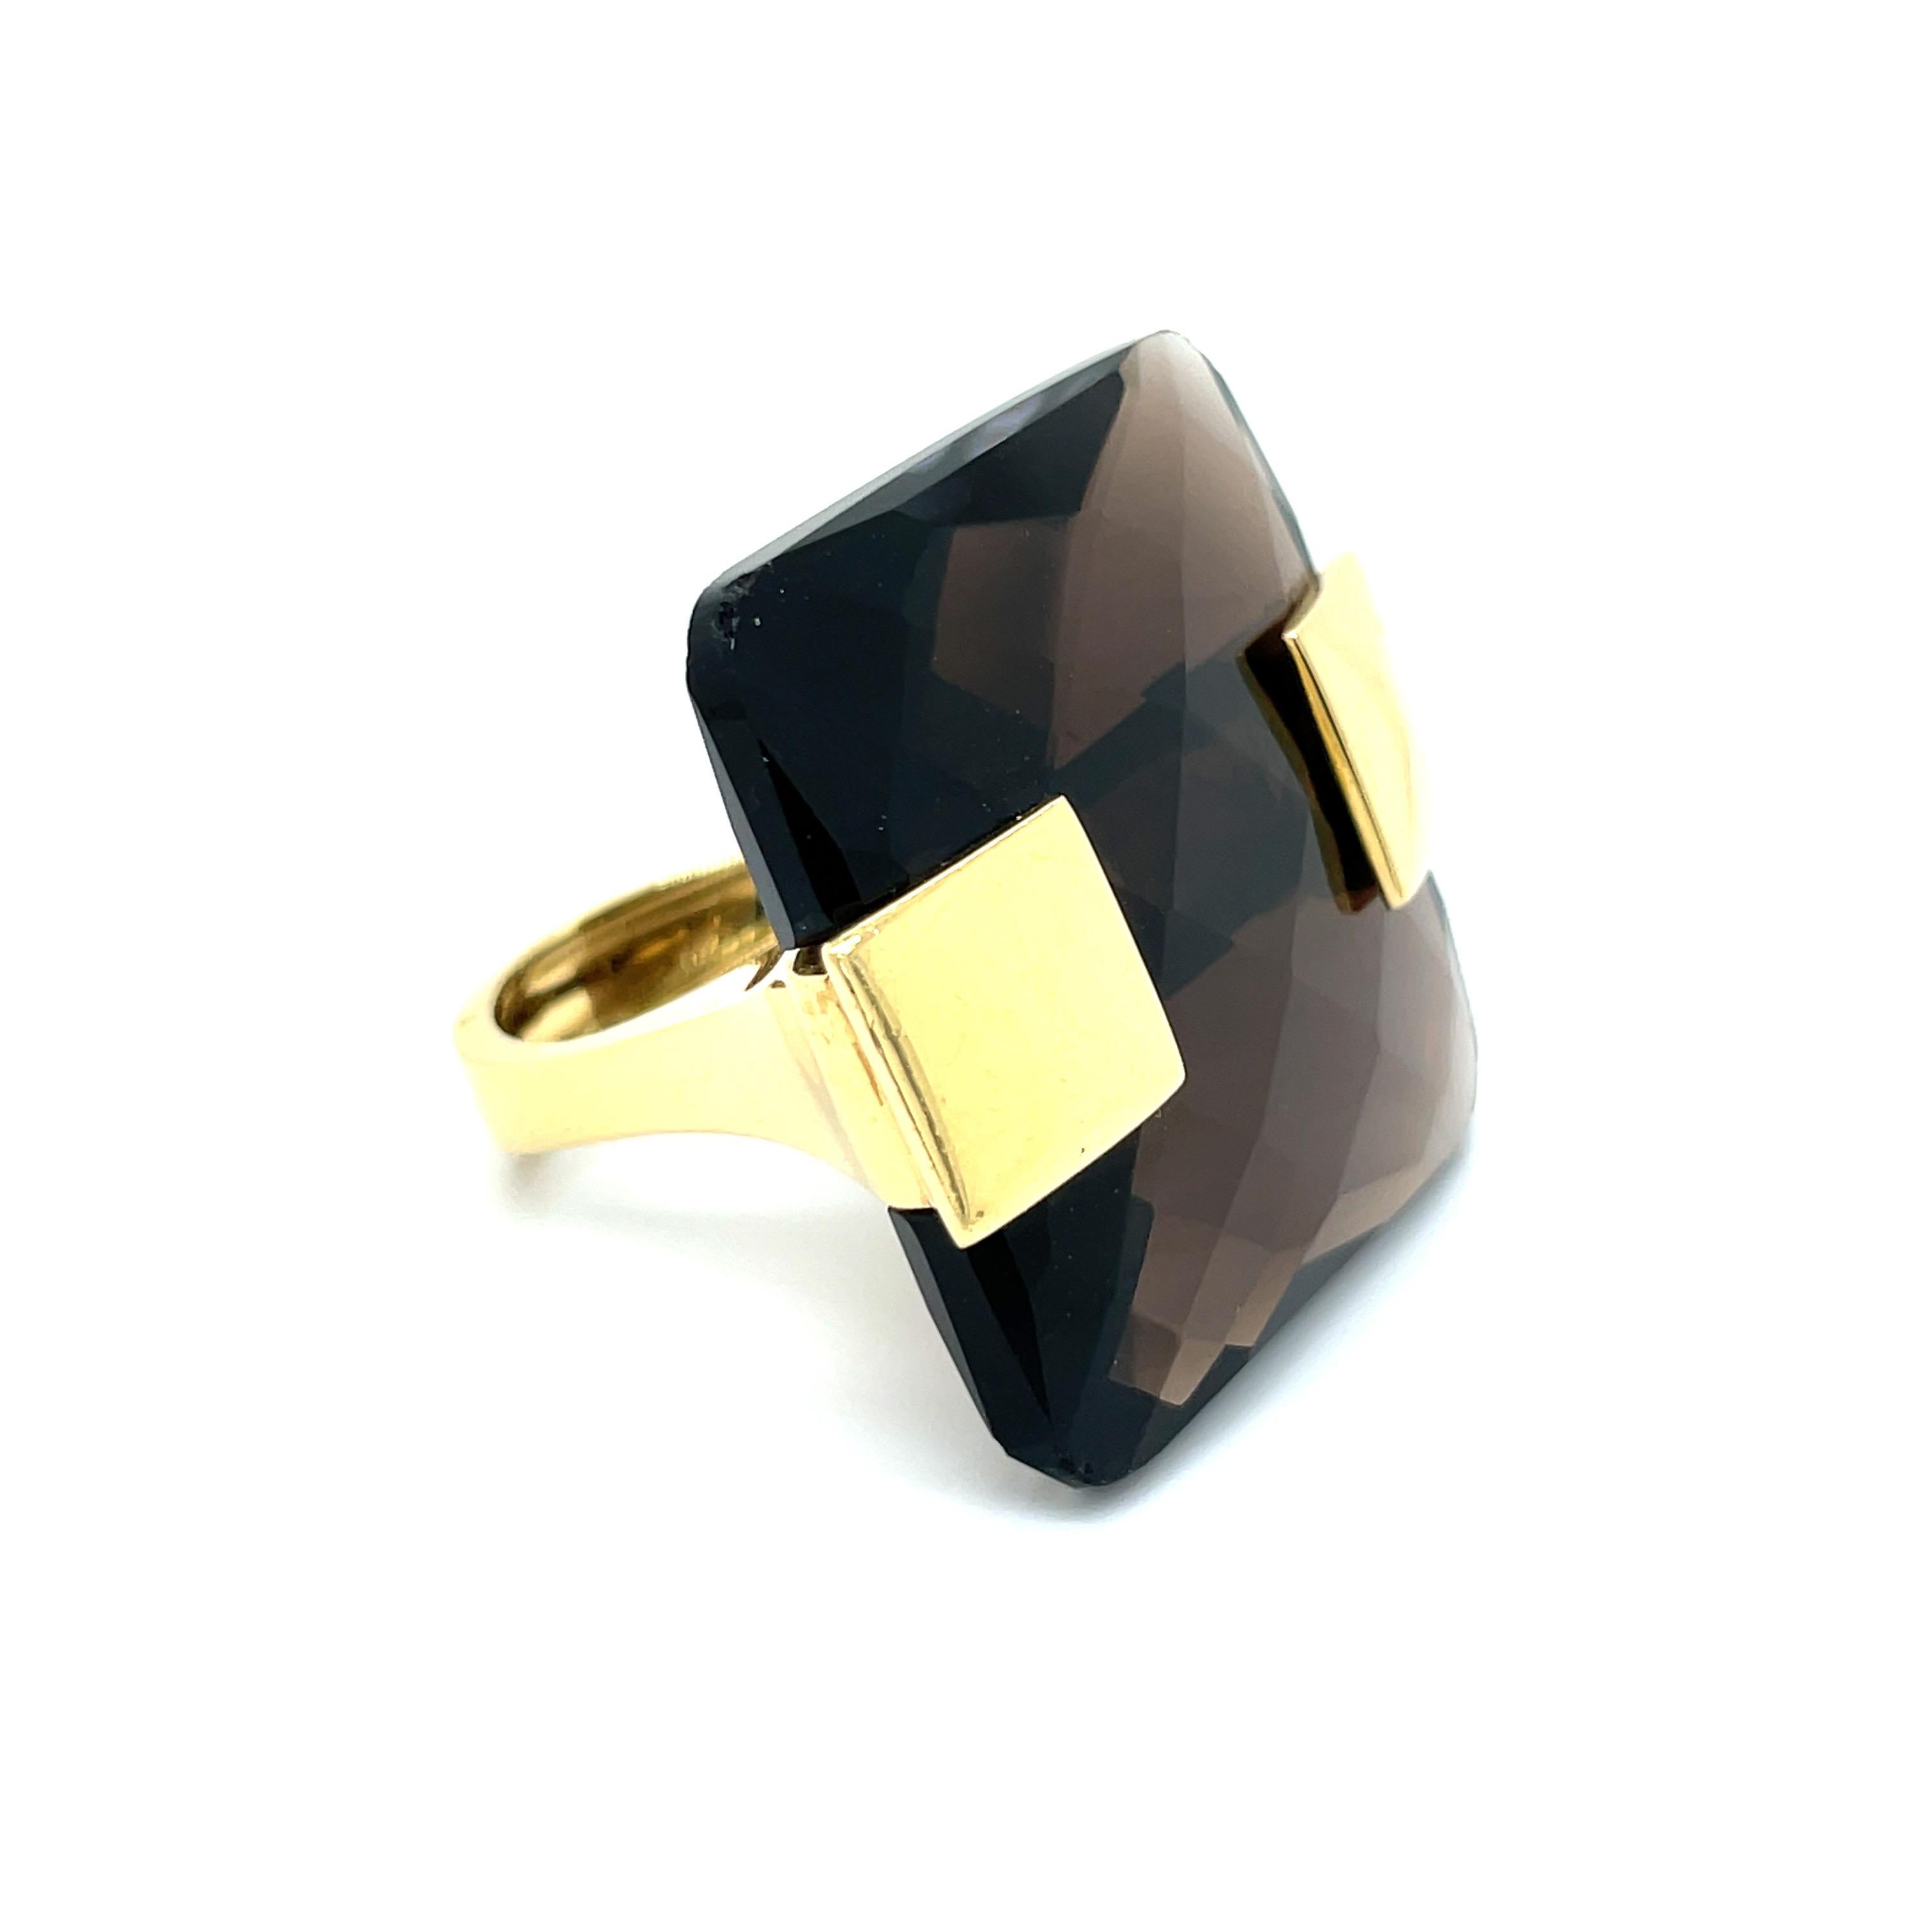 Featuring an incredible 42.60 carat square smokey quartz, supported by 23.60 grams of  18k yellow gold. This unique vintage ring is bold and beautiful fashion.


Metal Type : 18k Yellow Gold
Metal Weight : 23.60 grams
Ring Size : 6.75
Center Stone :